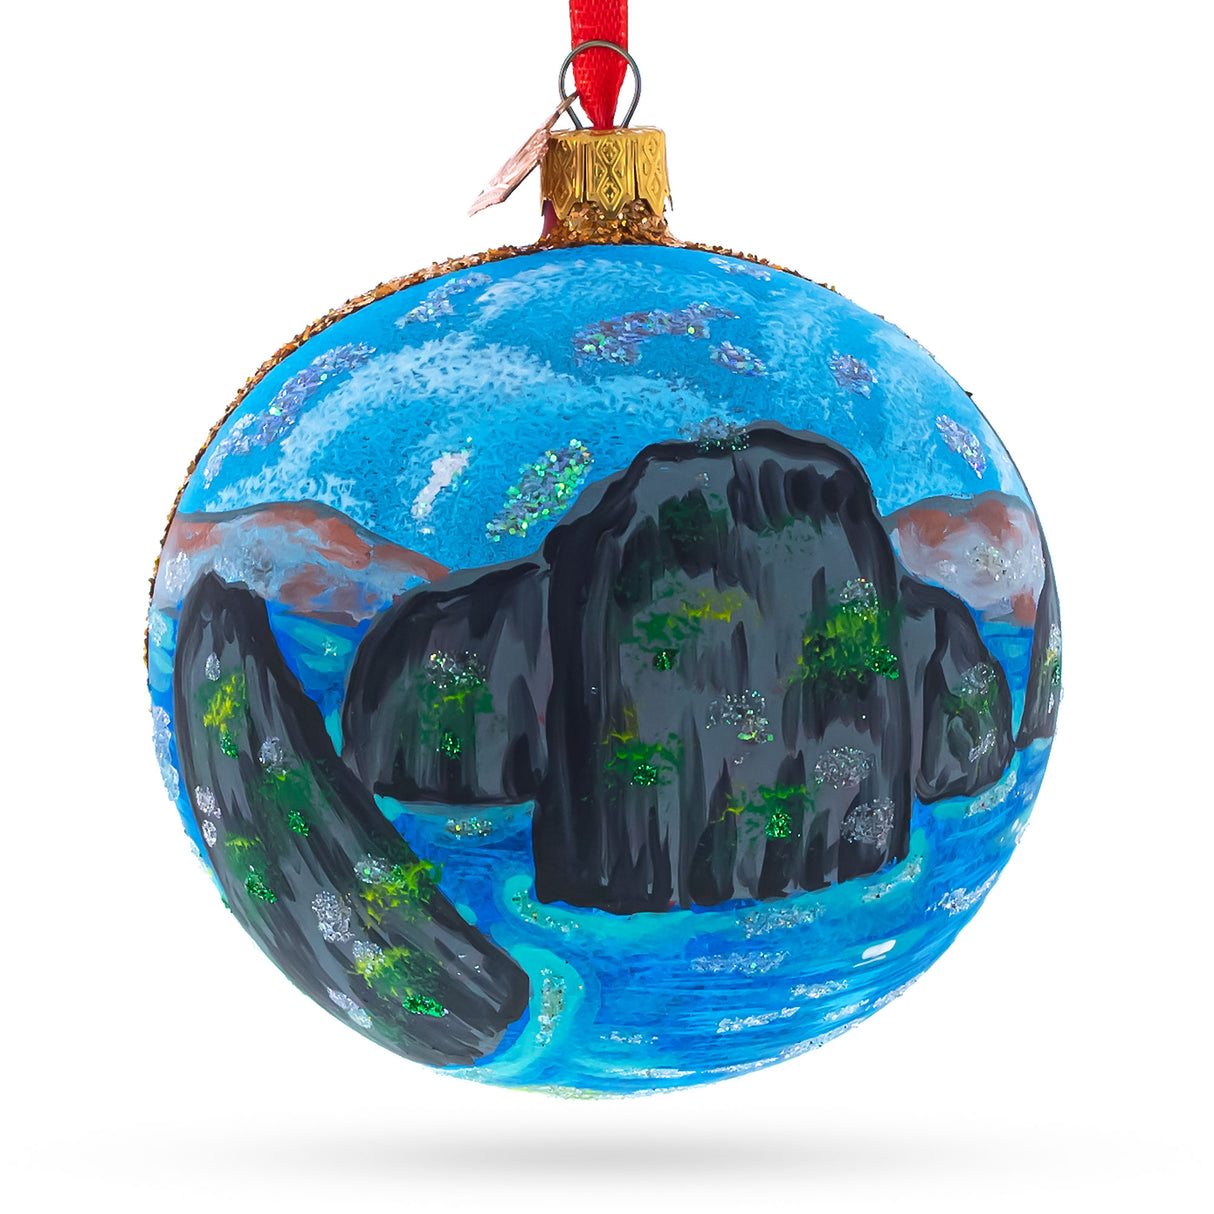 Philippines Glass Ball Christmas Ornament 4 Inches in Multi color, Round shape